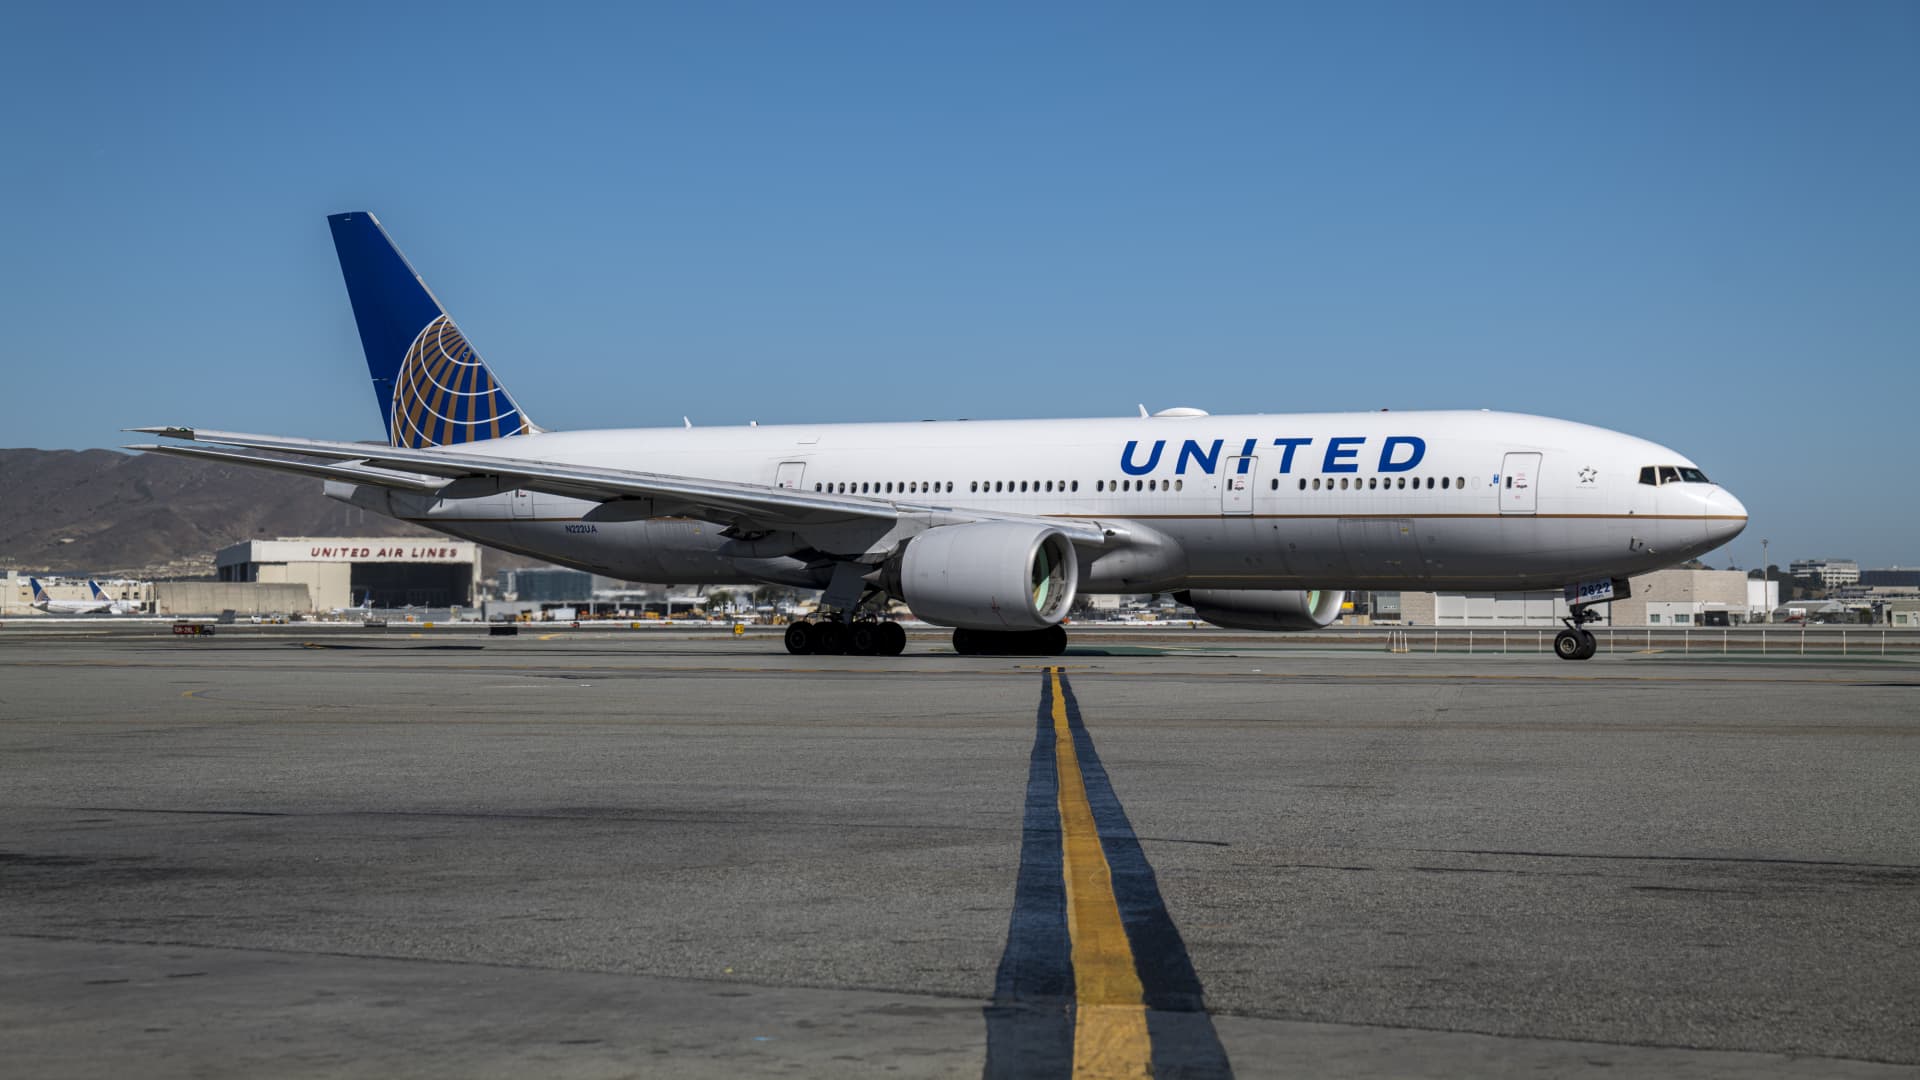 Stocks making the biggest moves midday: United Airlines, AT&T, Tesla and more